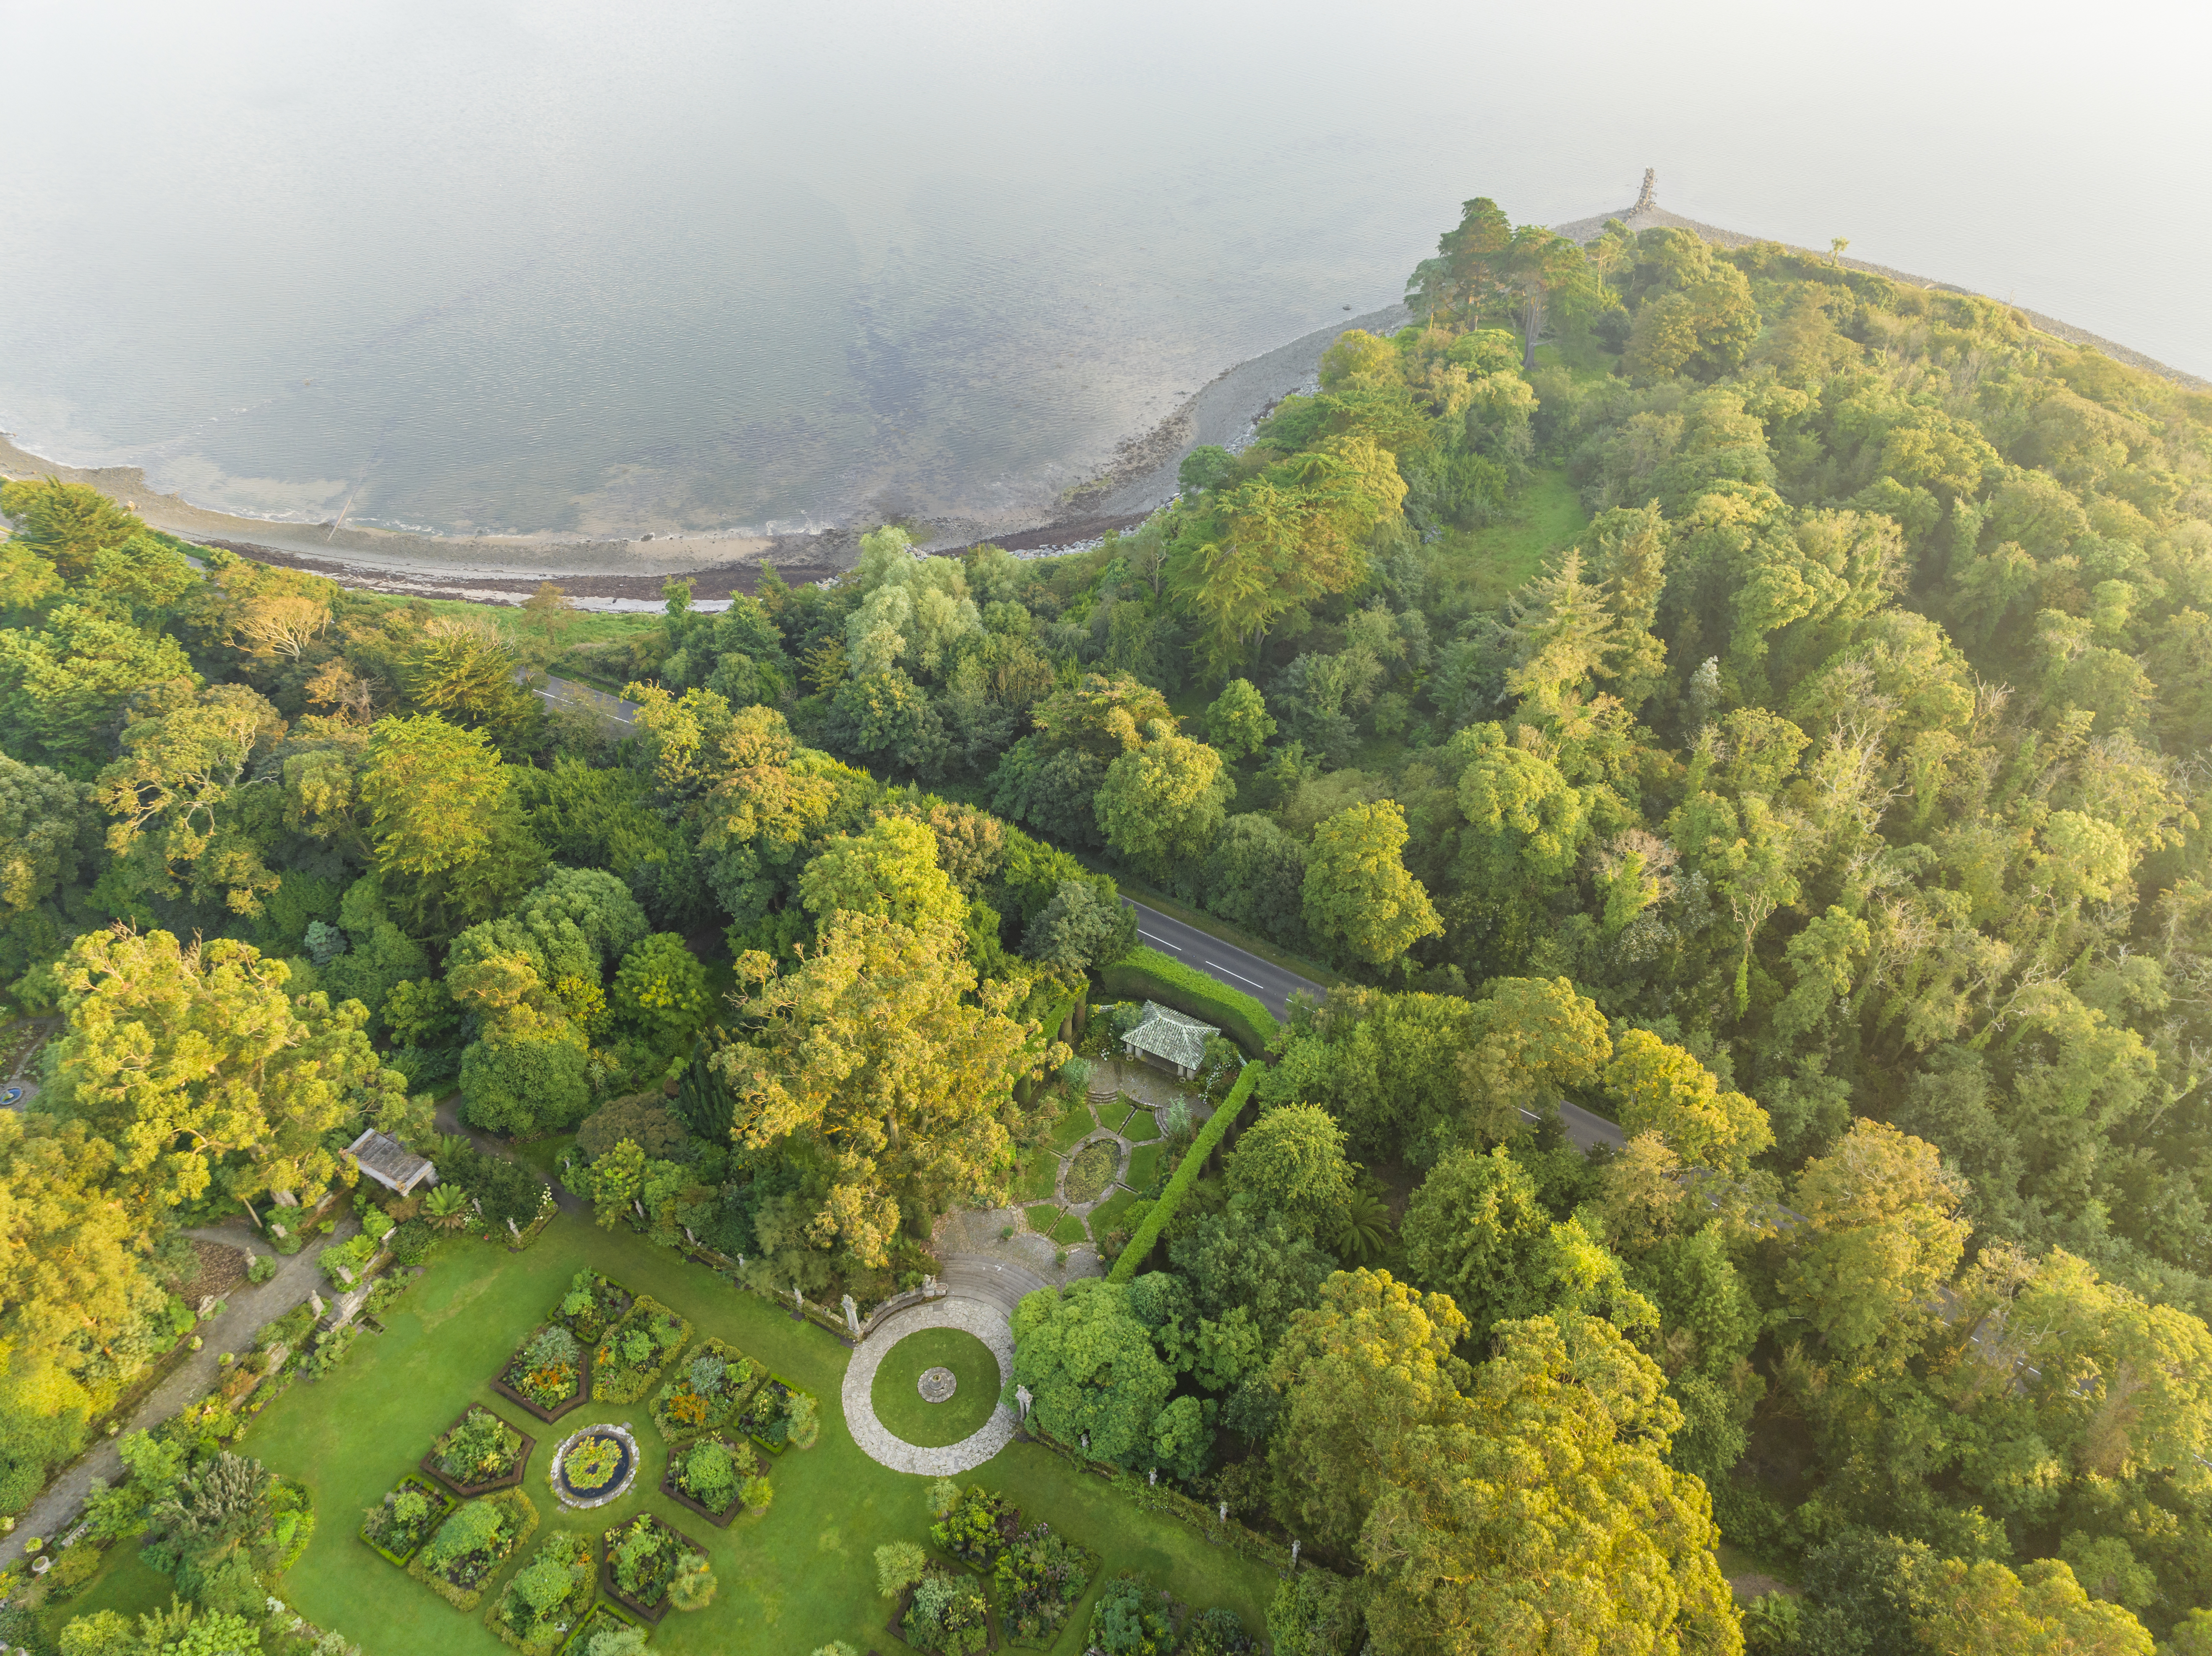 Aerial view of Mount Stewart garden showing its proximity to Strangford Lough (